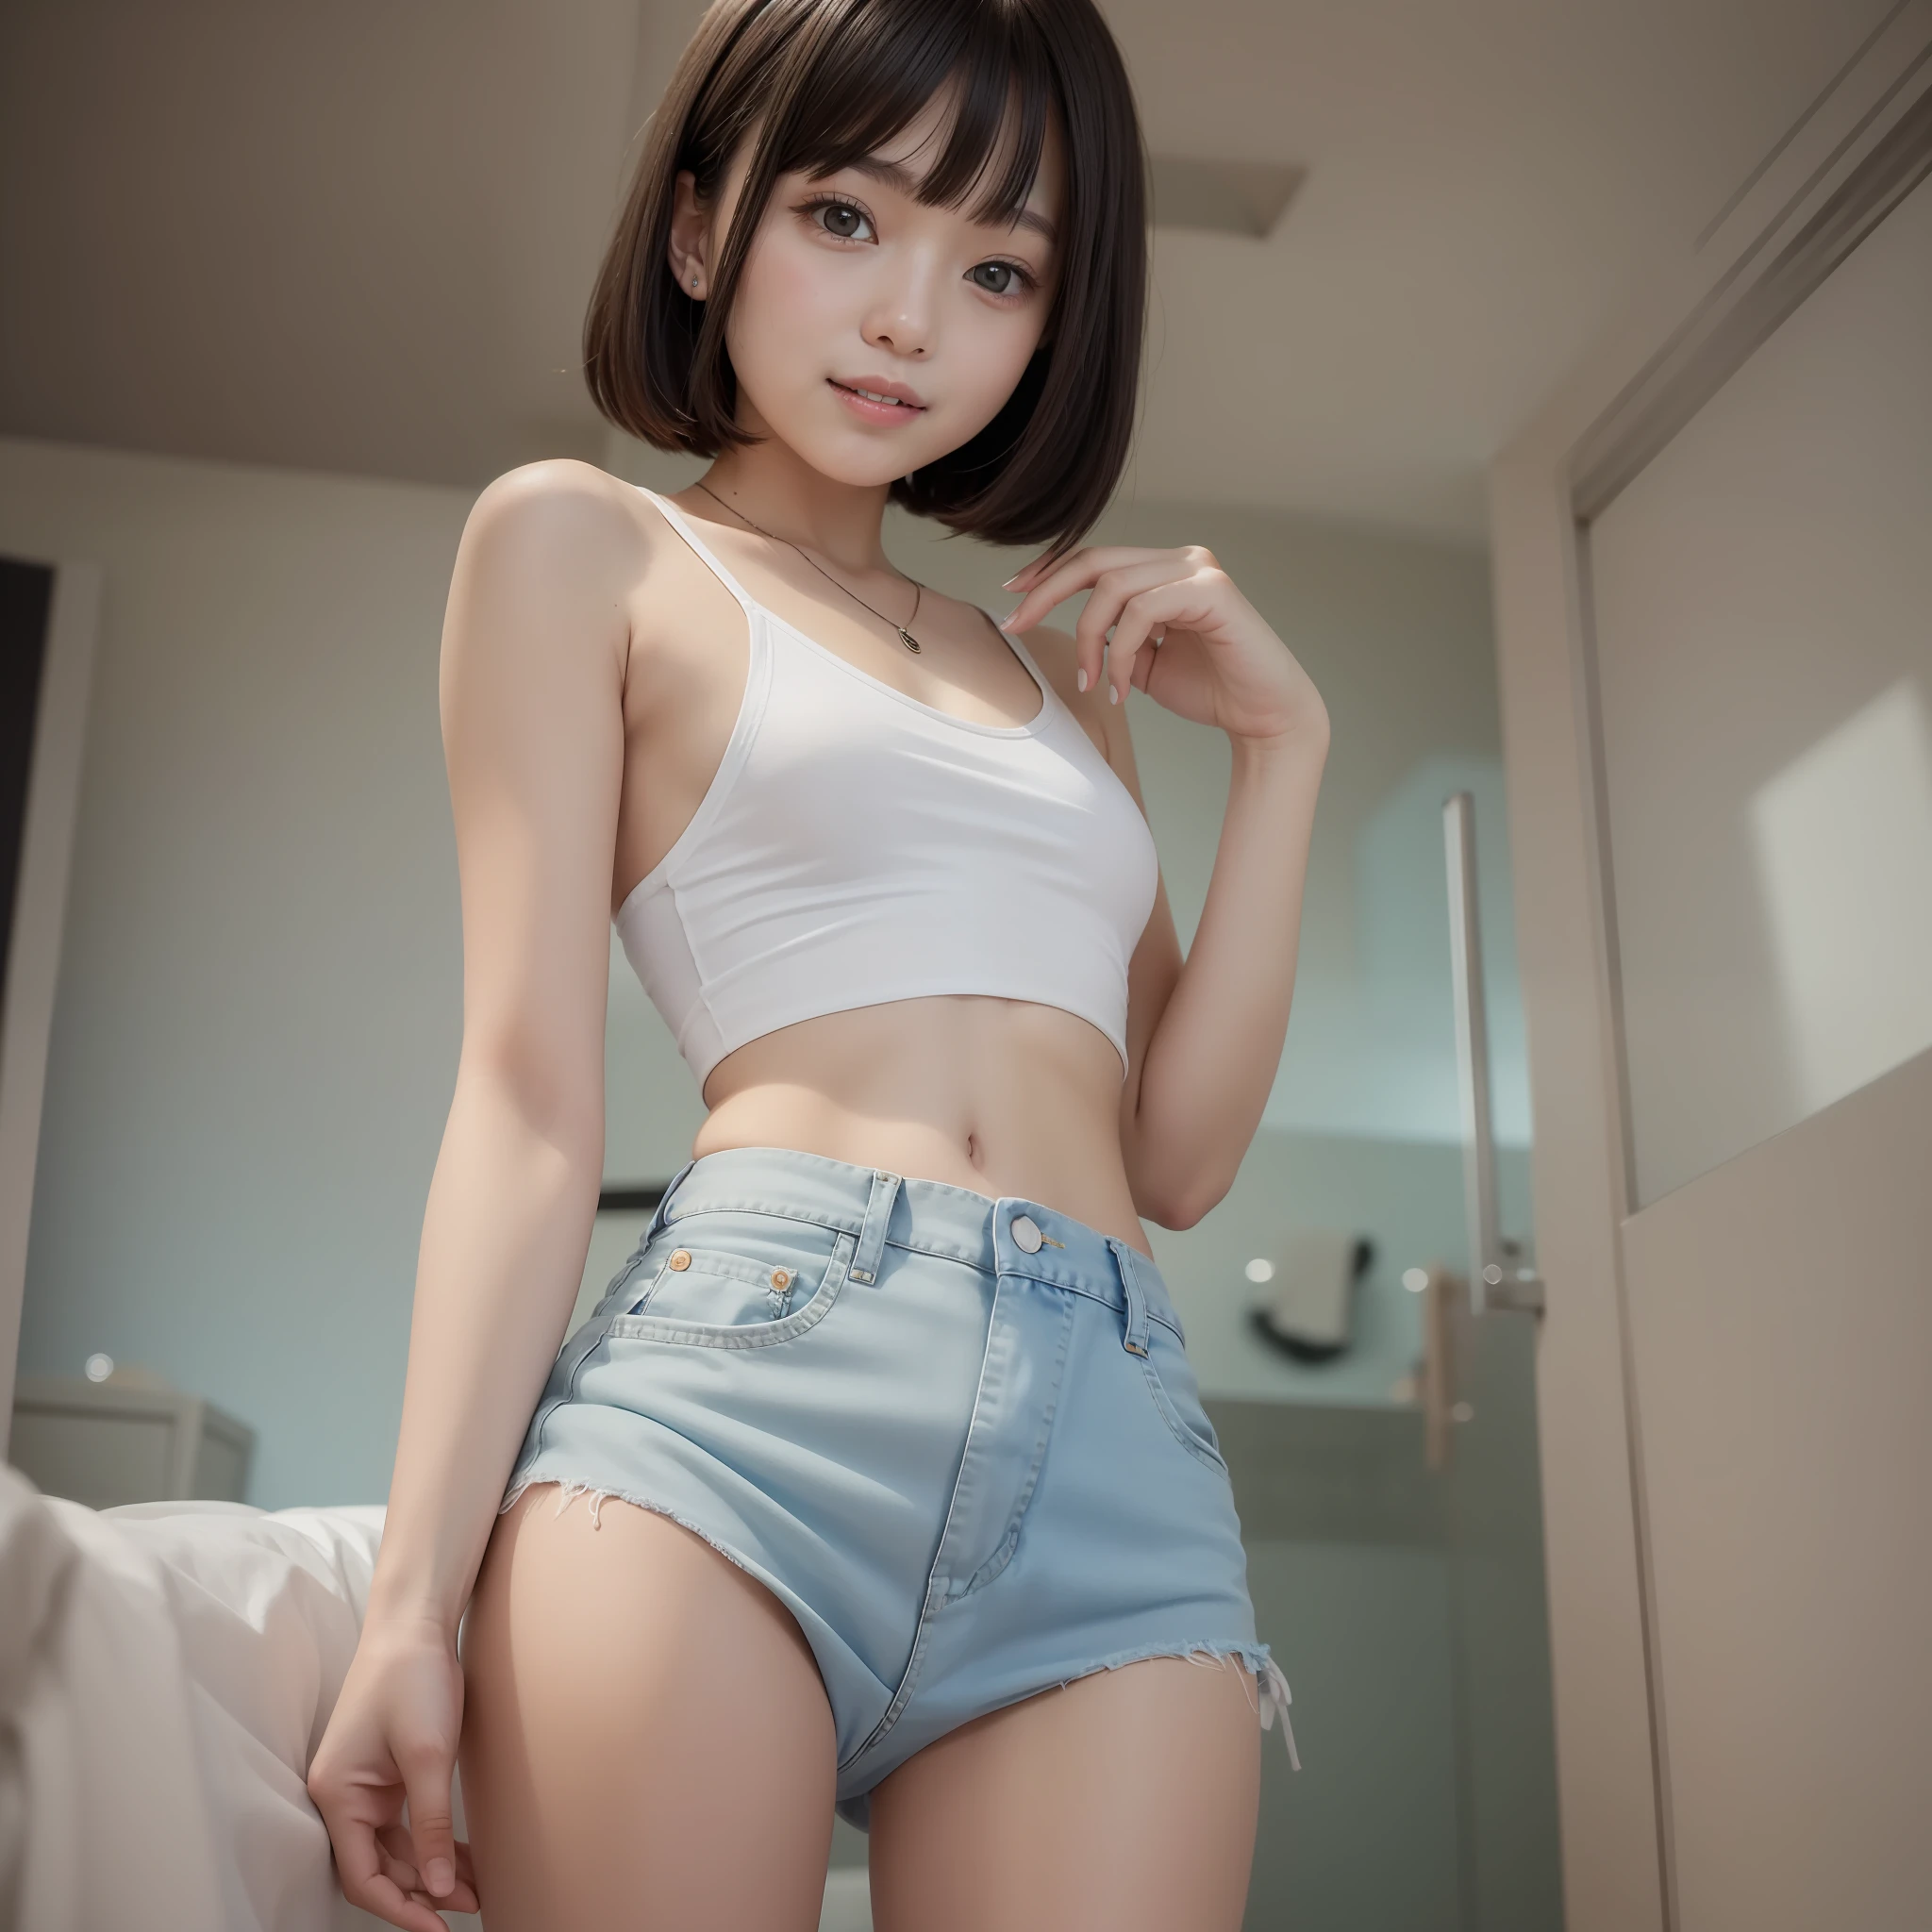 With the best image quality、Teenage girl standing in room。Black Hair Bob Hair、Cute smile with mouth closed.。(tiny chest)、White camisole、Denim panties